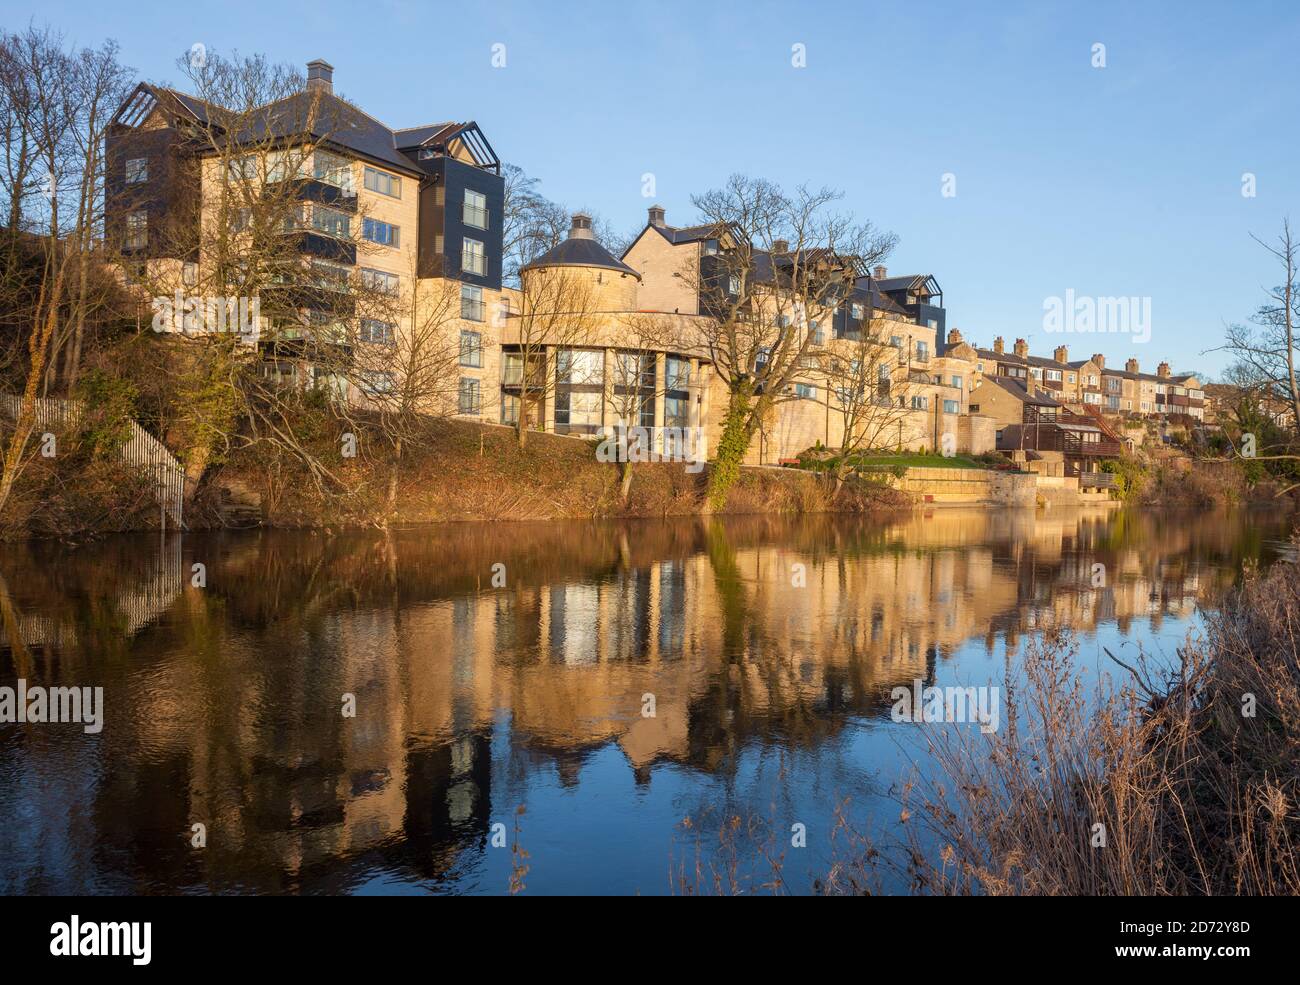 Moderno complesso di appartamenti lungo il fiume Wharfe a Wetherby, West Yorkshire Foto Stock